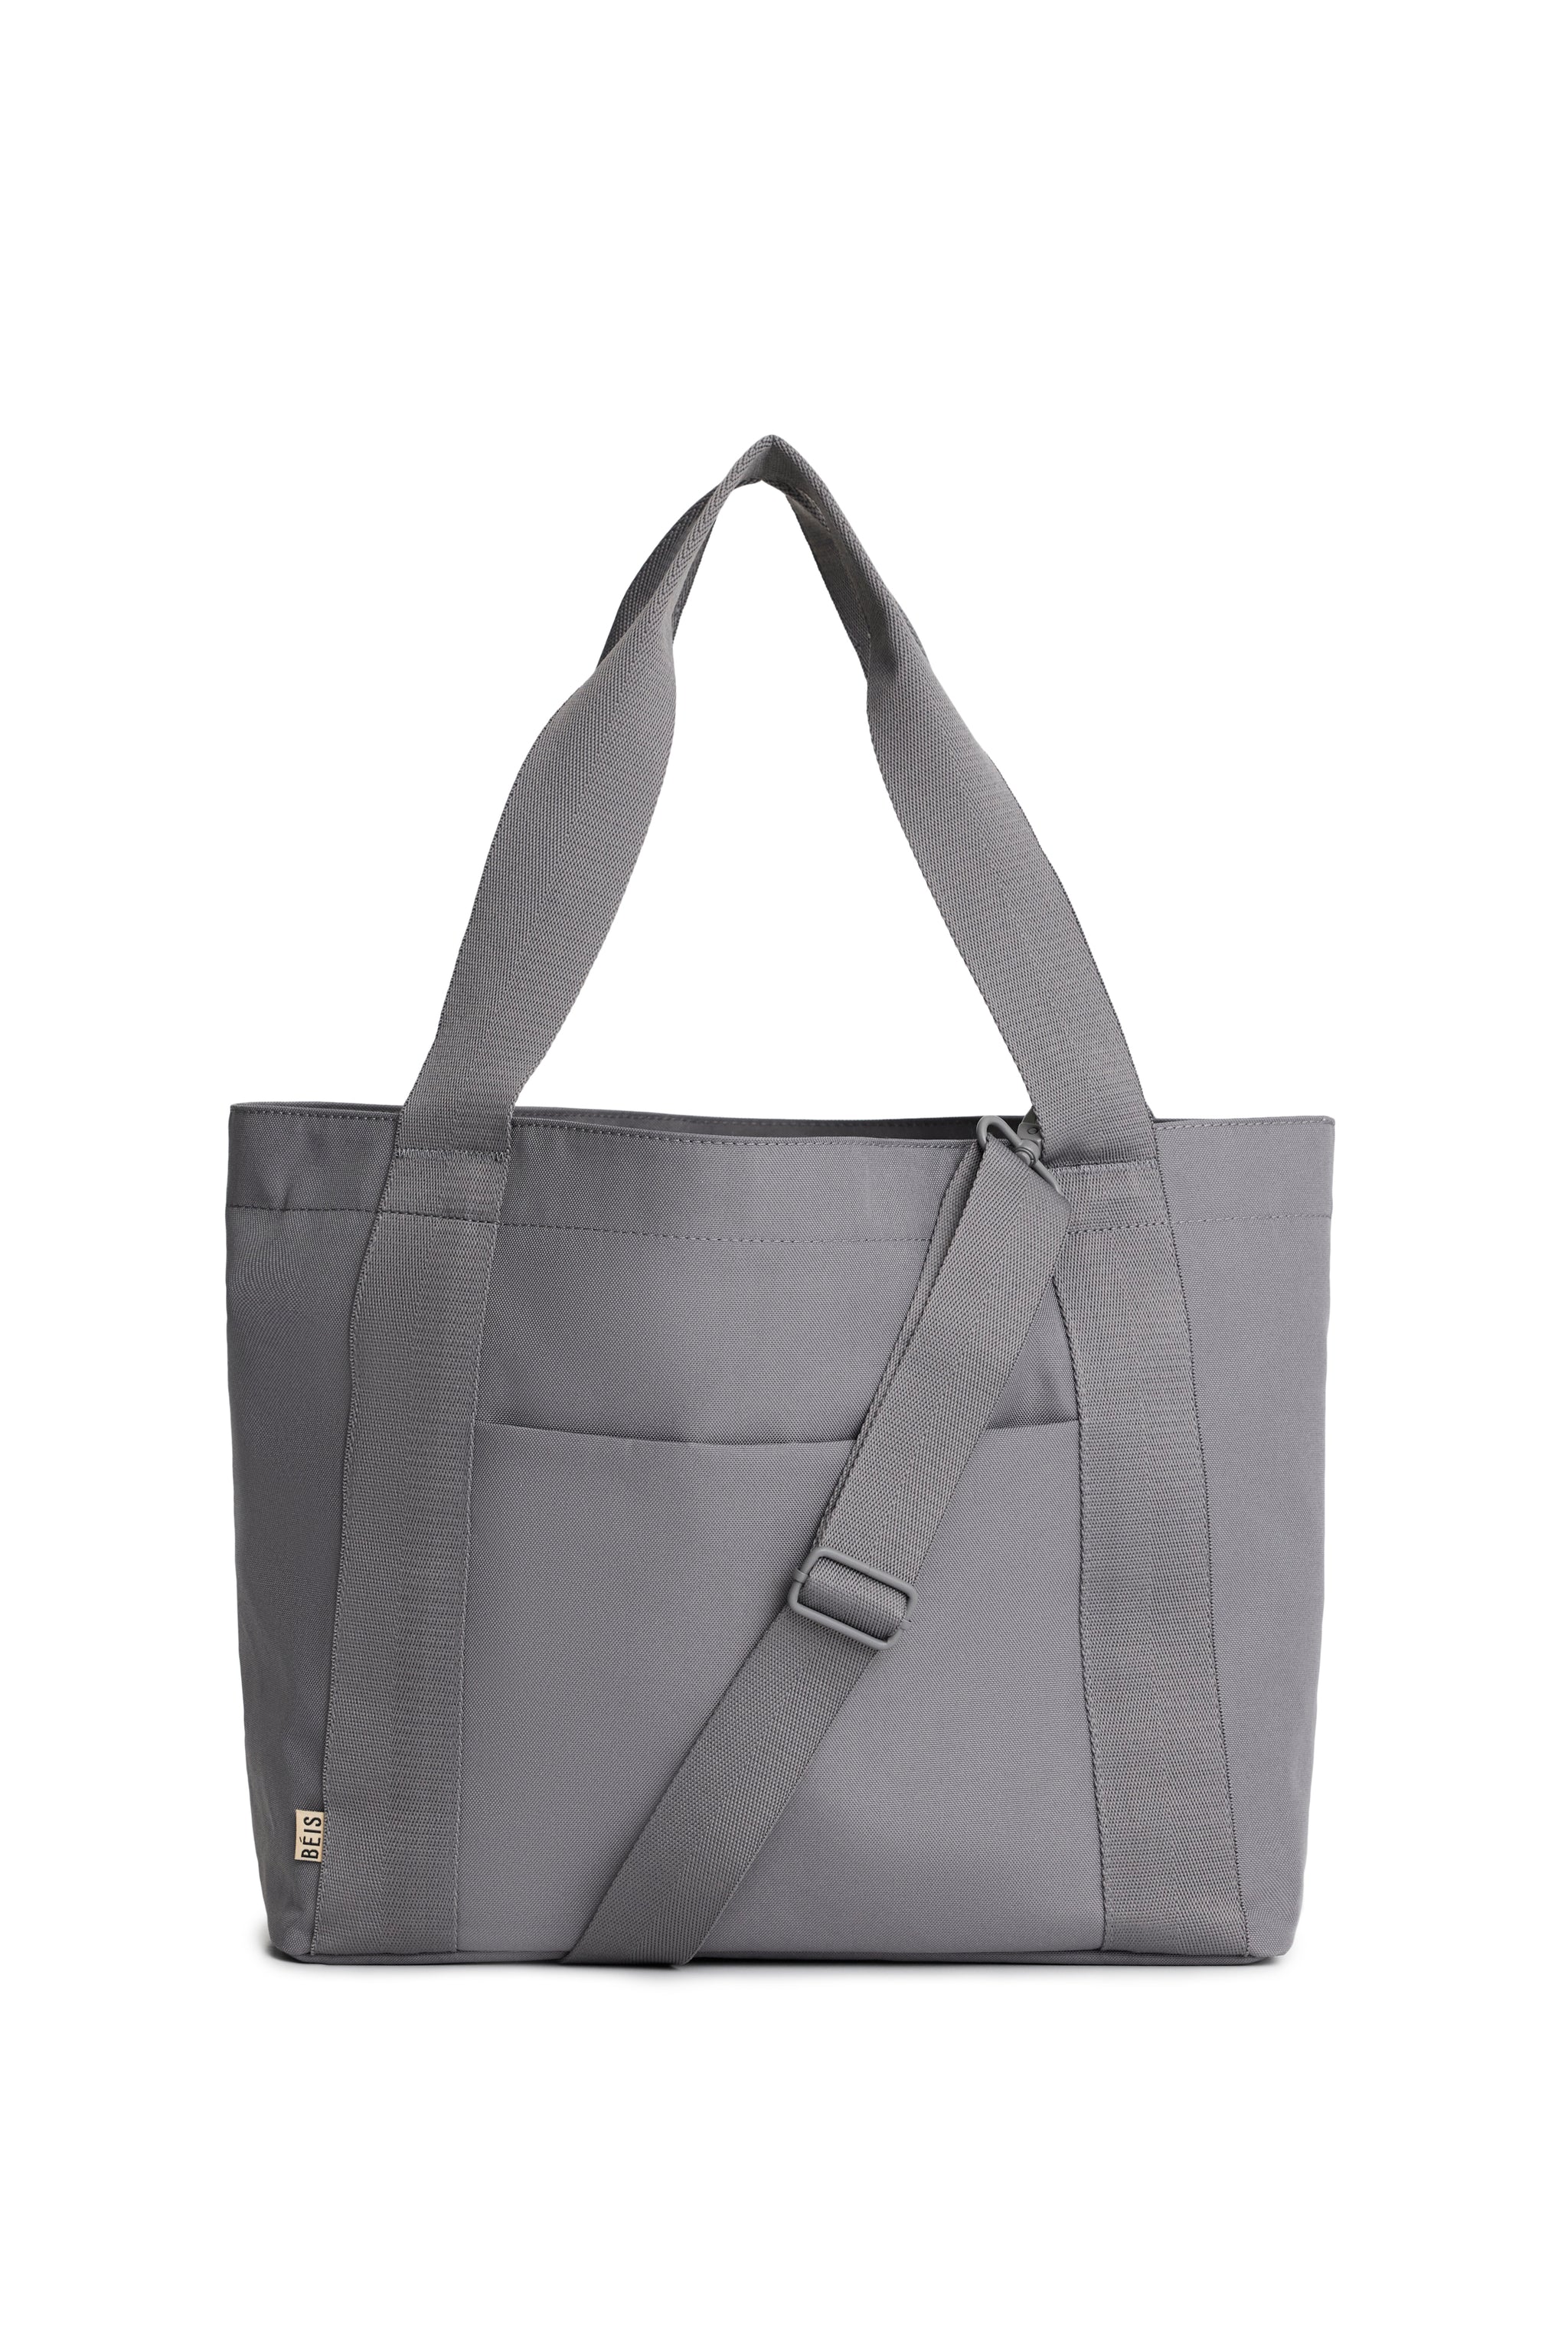 BÉIS 'The BEISICS Tote' in Grey - Large Grey Tote Bag With Zipper